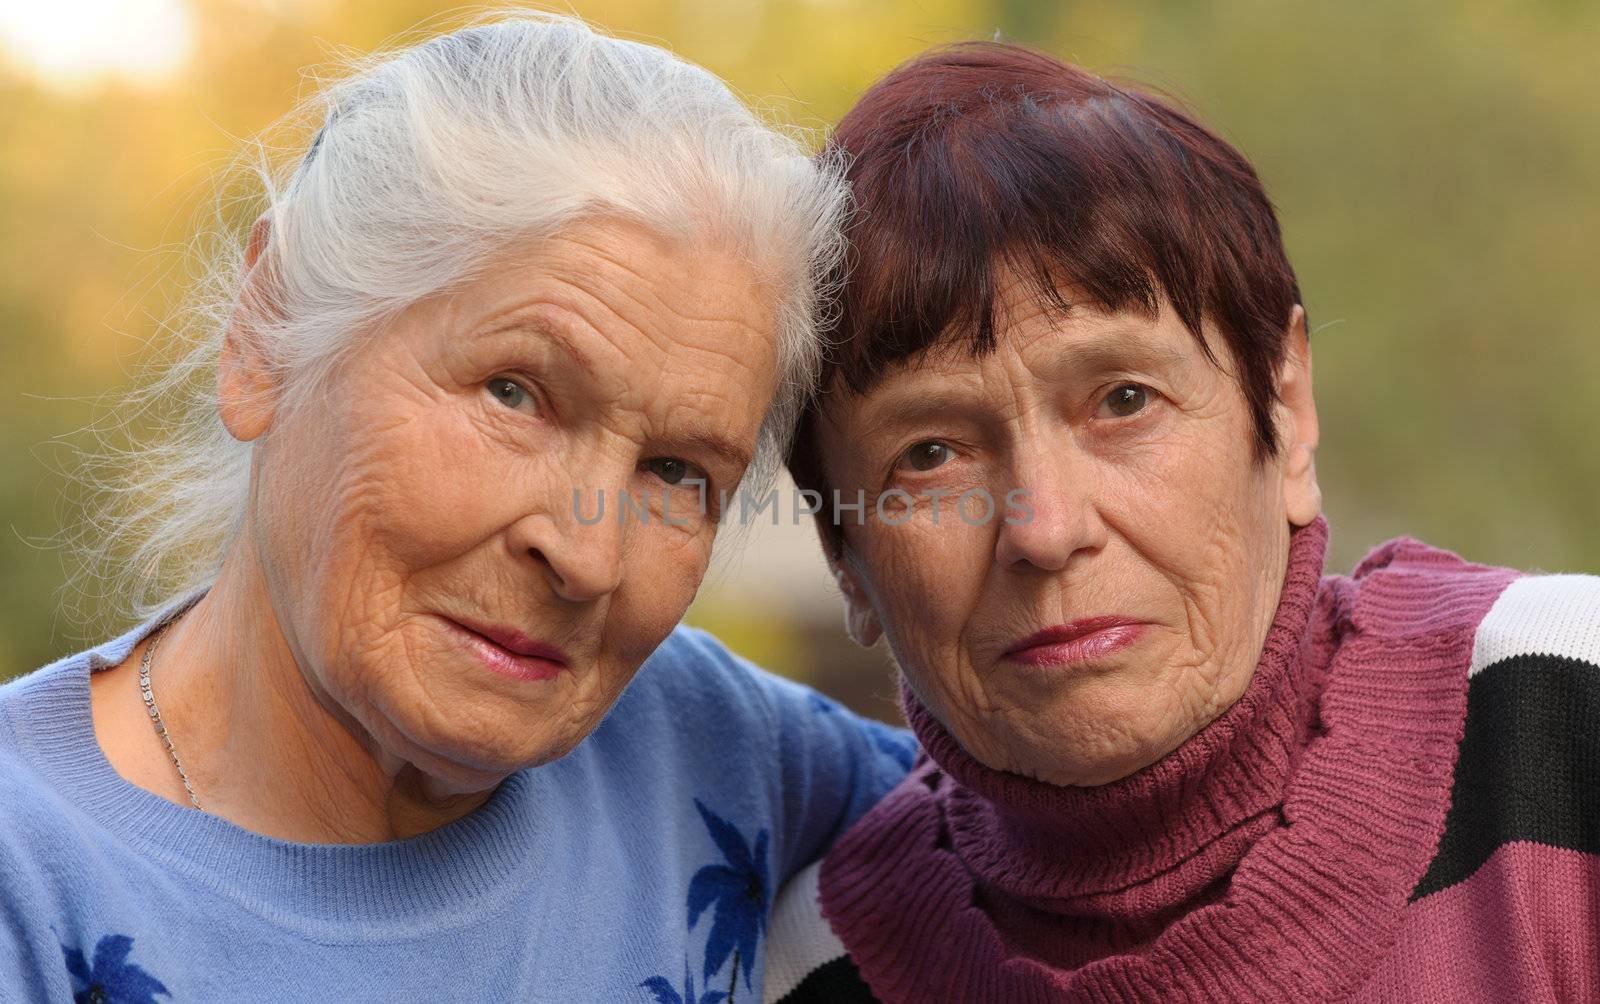 Two sisters of old age. A photo on outdoors